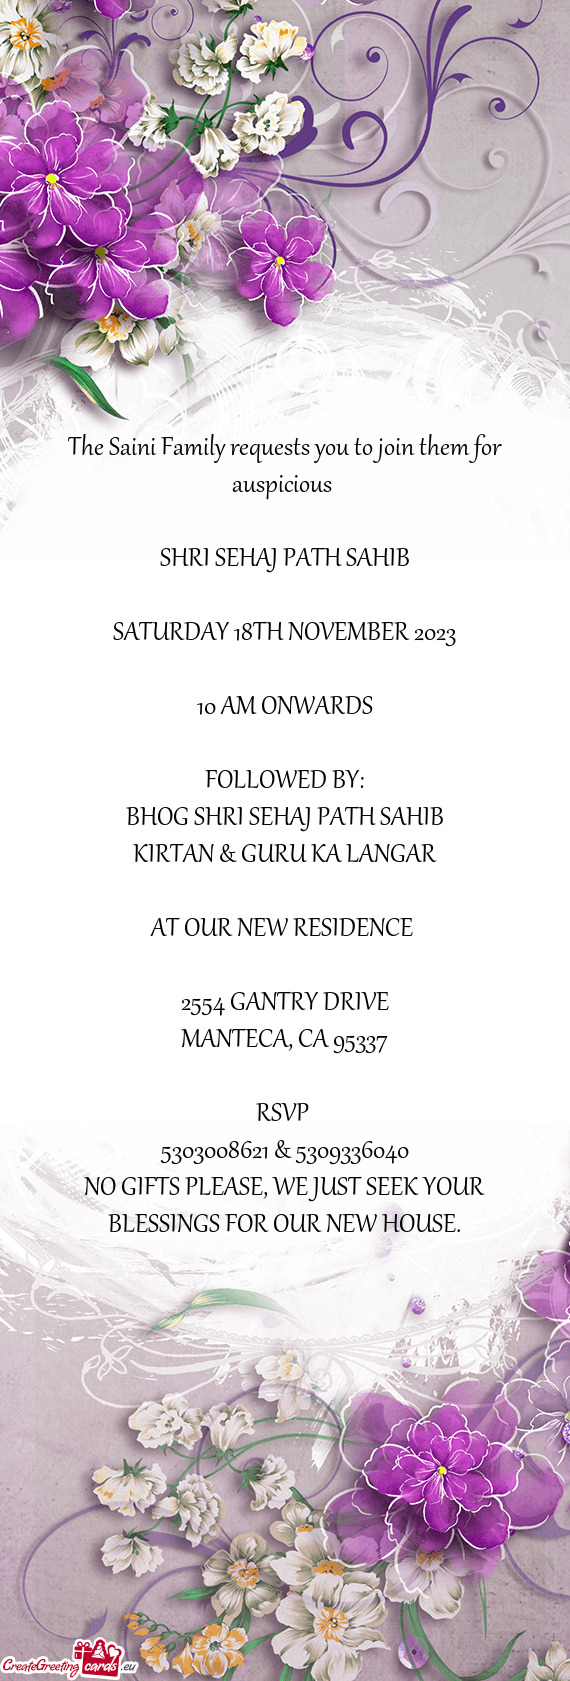 The Saini Family requests you to join them for auspicious